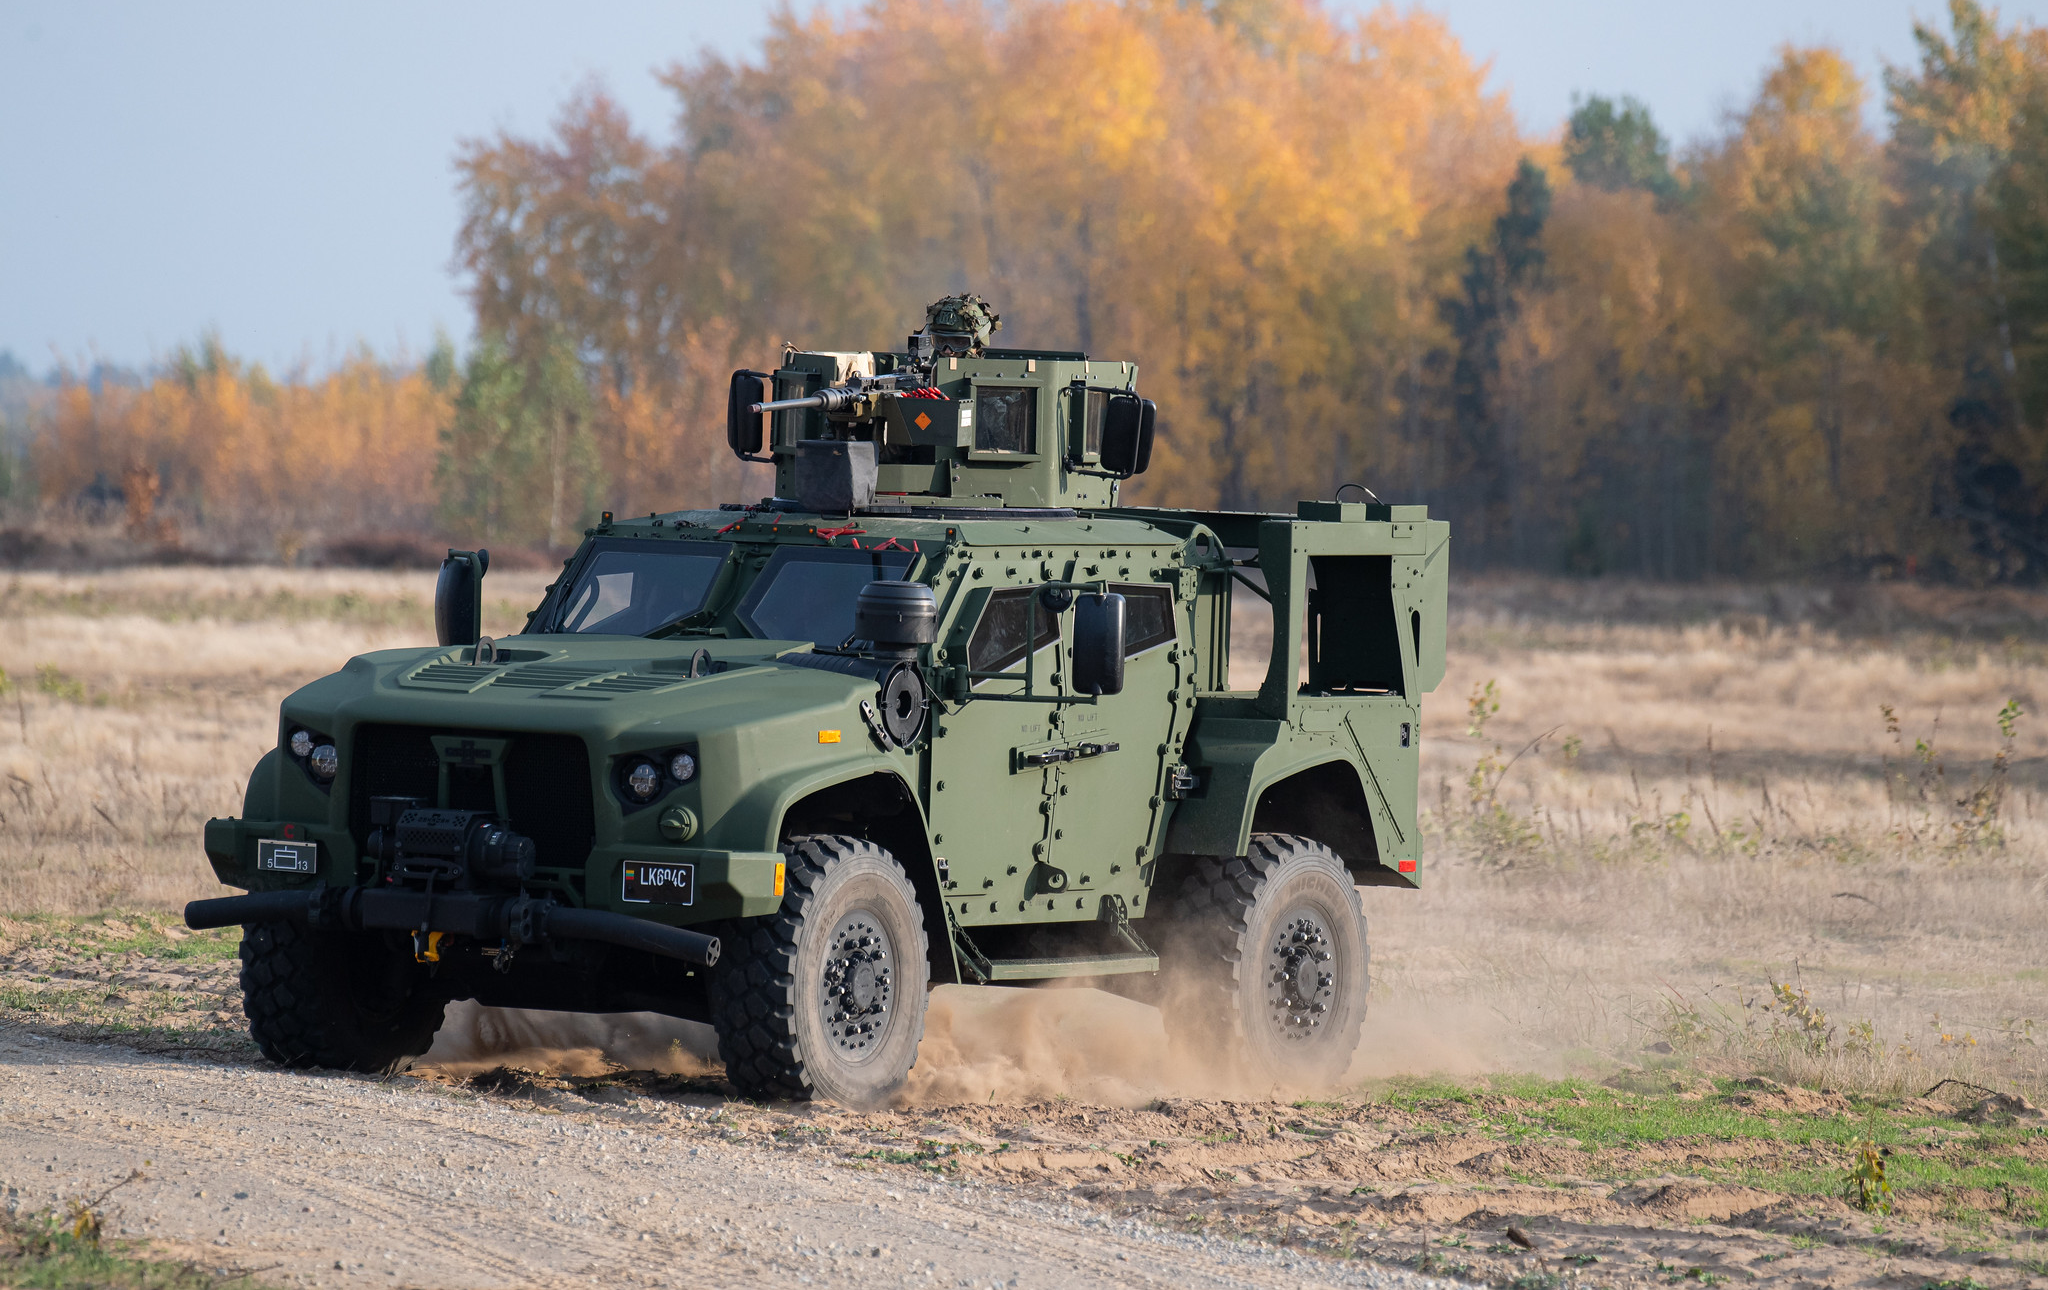 The Lithuanian Army received another 50 American JLTV armored vehicles